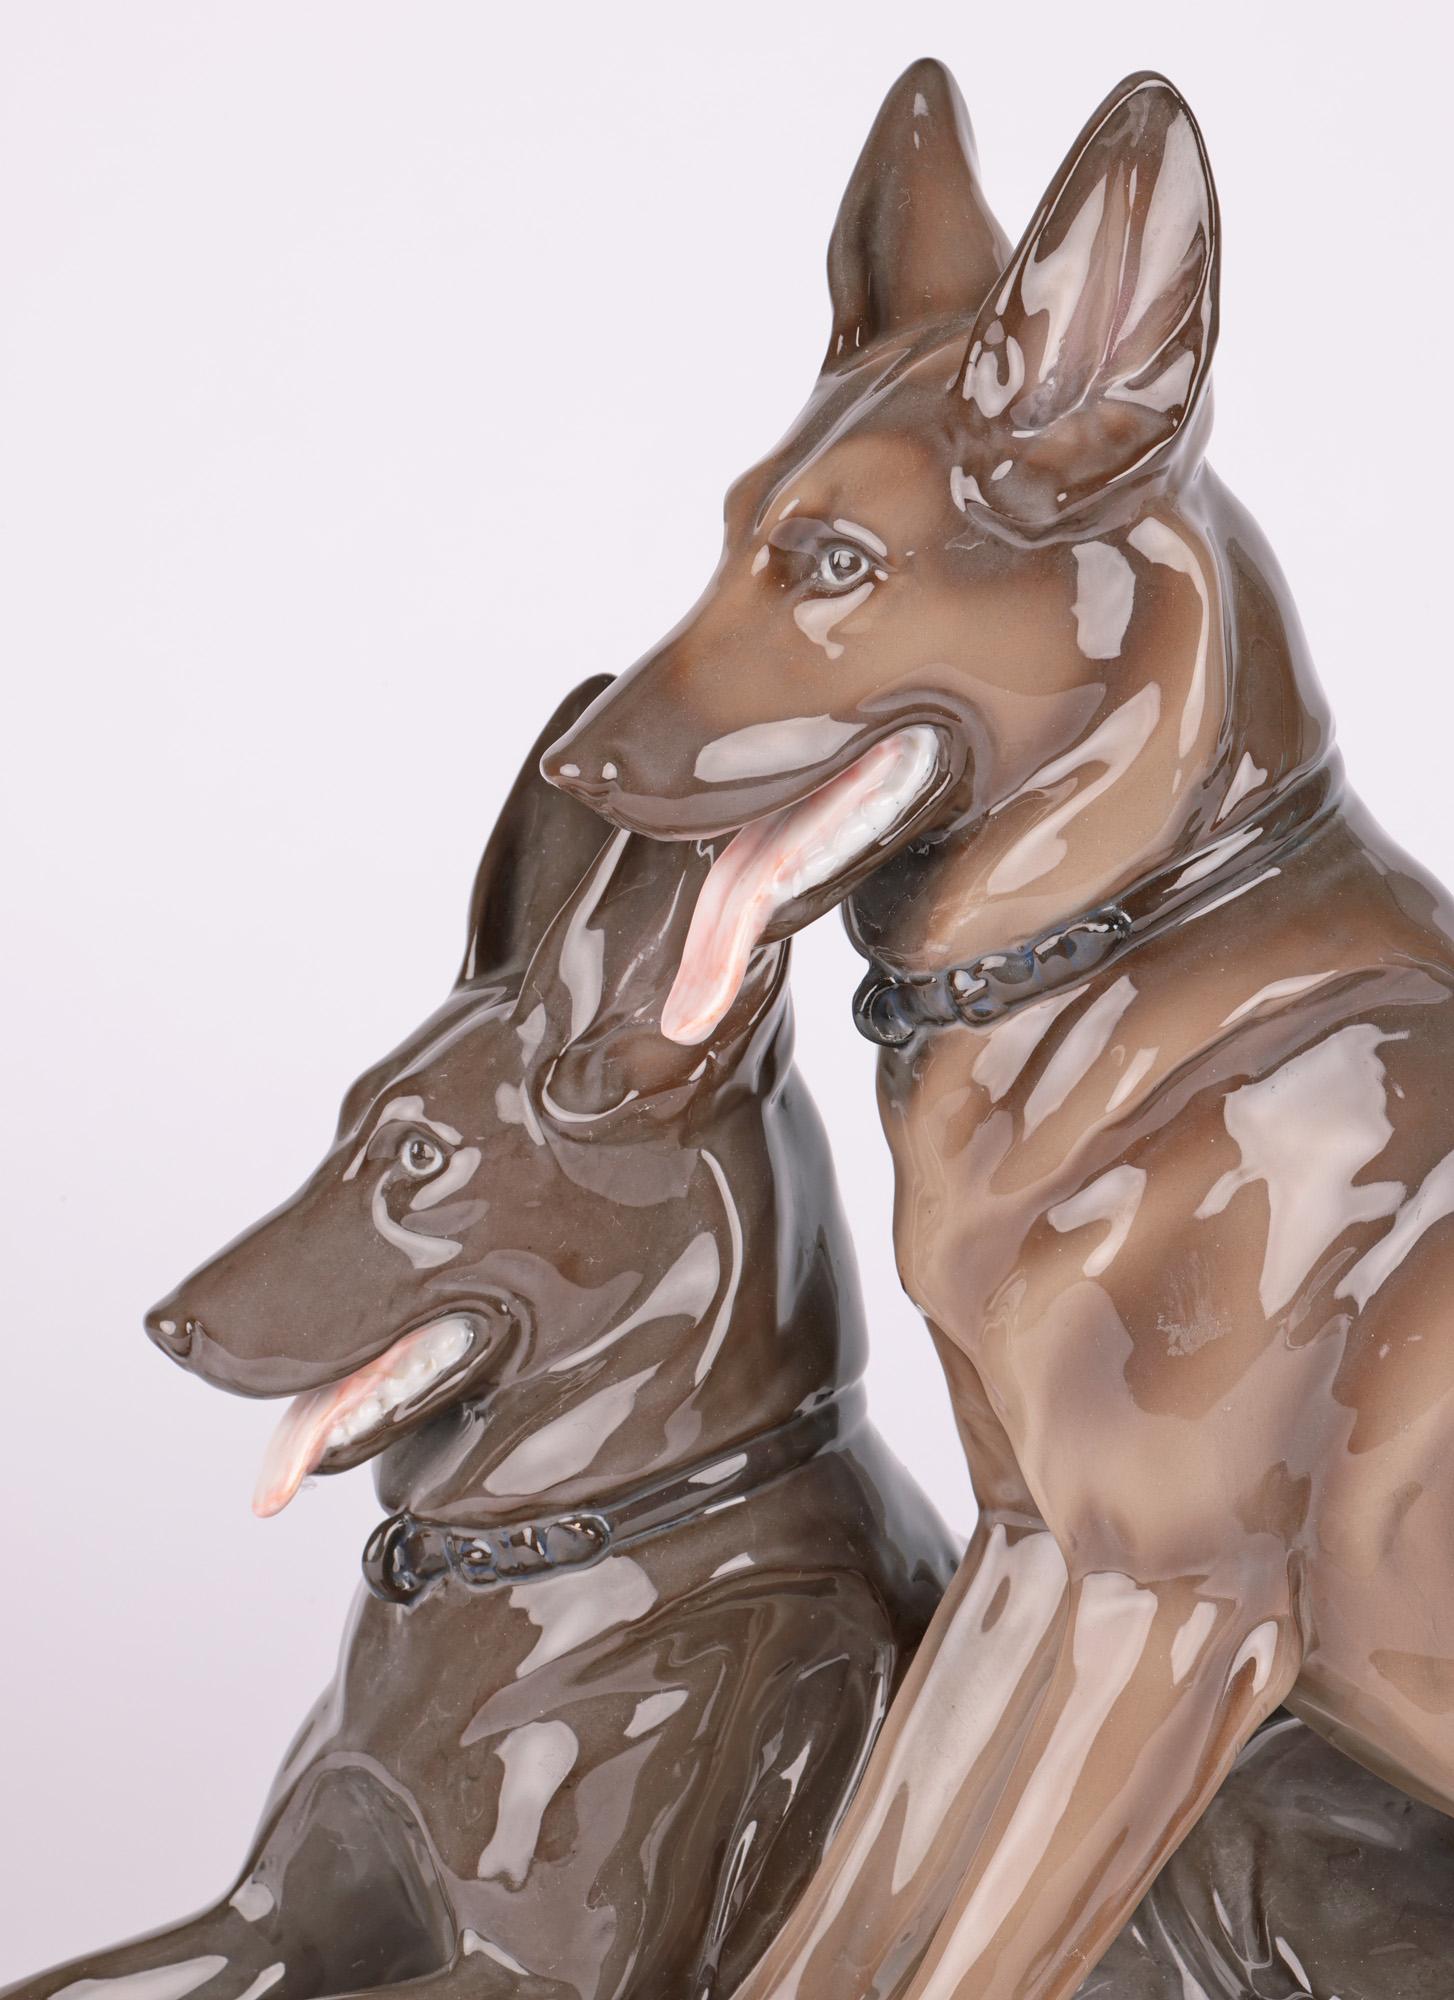 A fine German porcelain group of two German Shepherd dogs by Pfeffer Gotha and dating from the early to mid 20th Century. The dogs are presented raised on a an oval shaped base with one dog lying while the other sits alongside both with their eyes